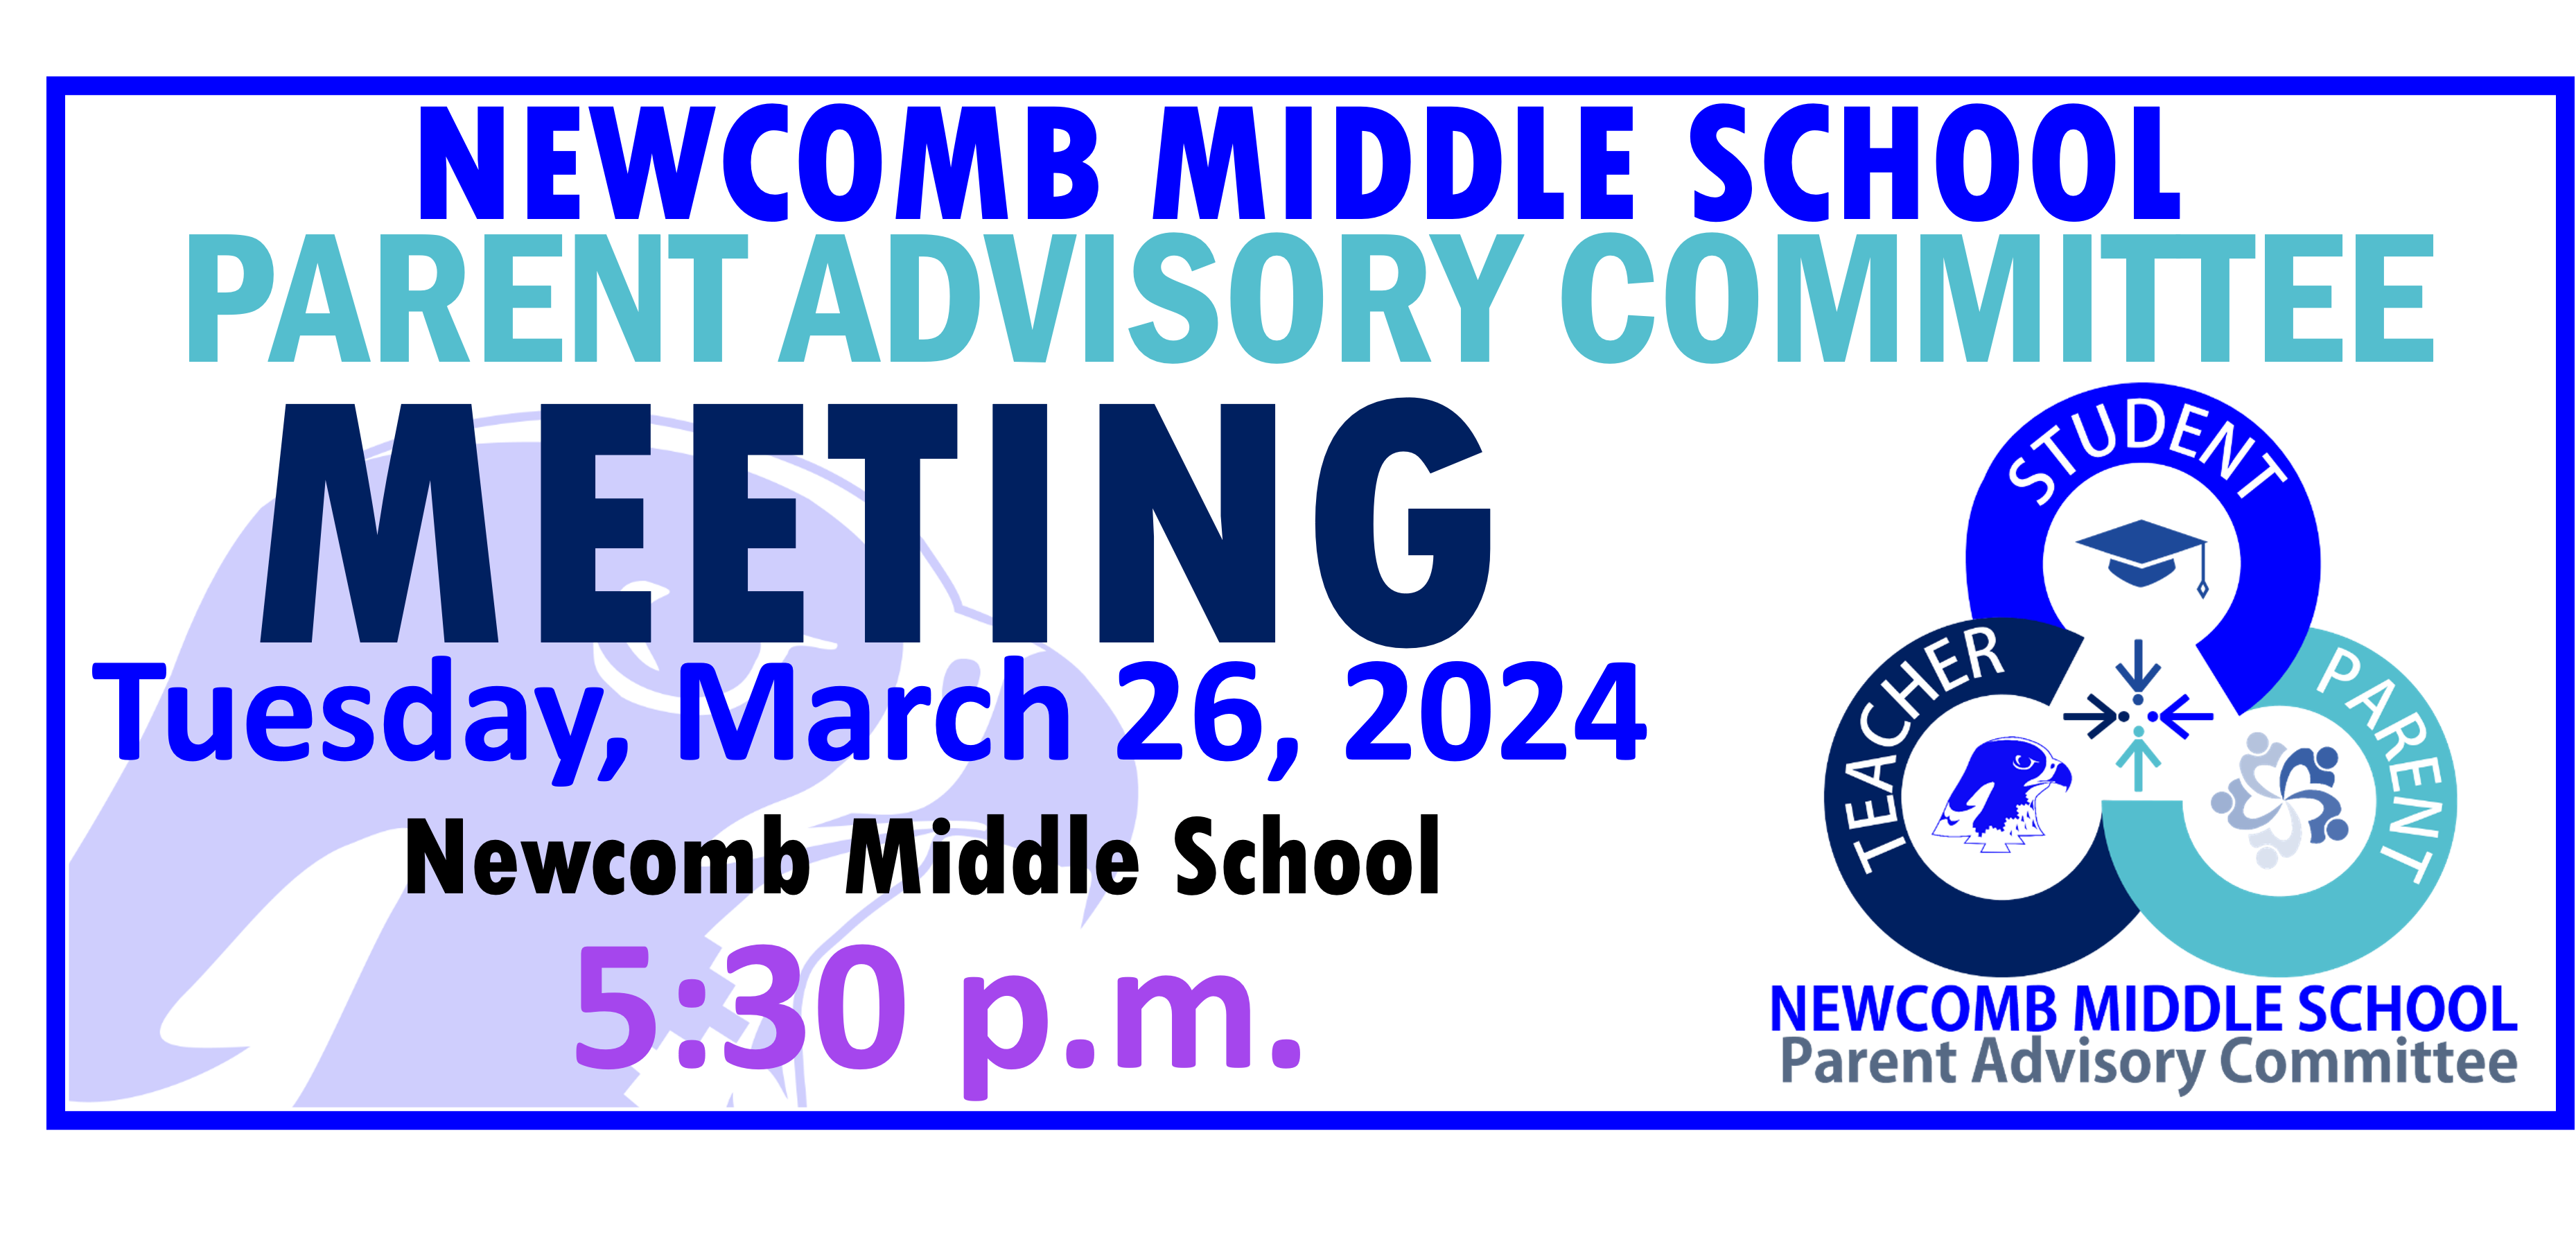 NMS Parent Advisory Committee Meeting, Tuesday, March 26, 2024 @ 5:30 p.m.